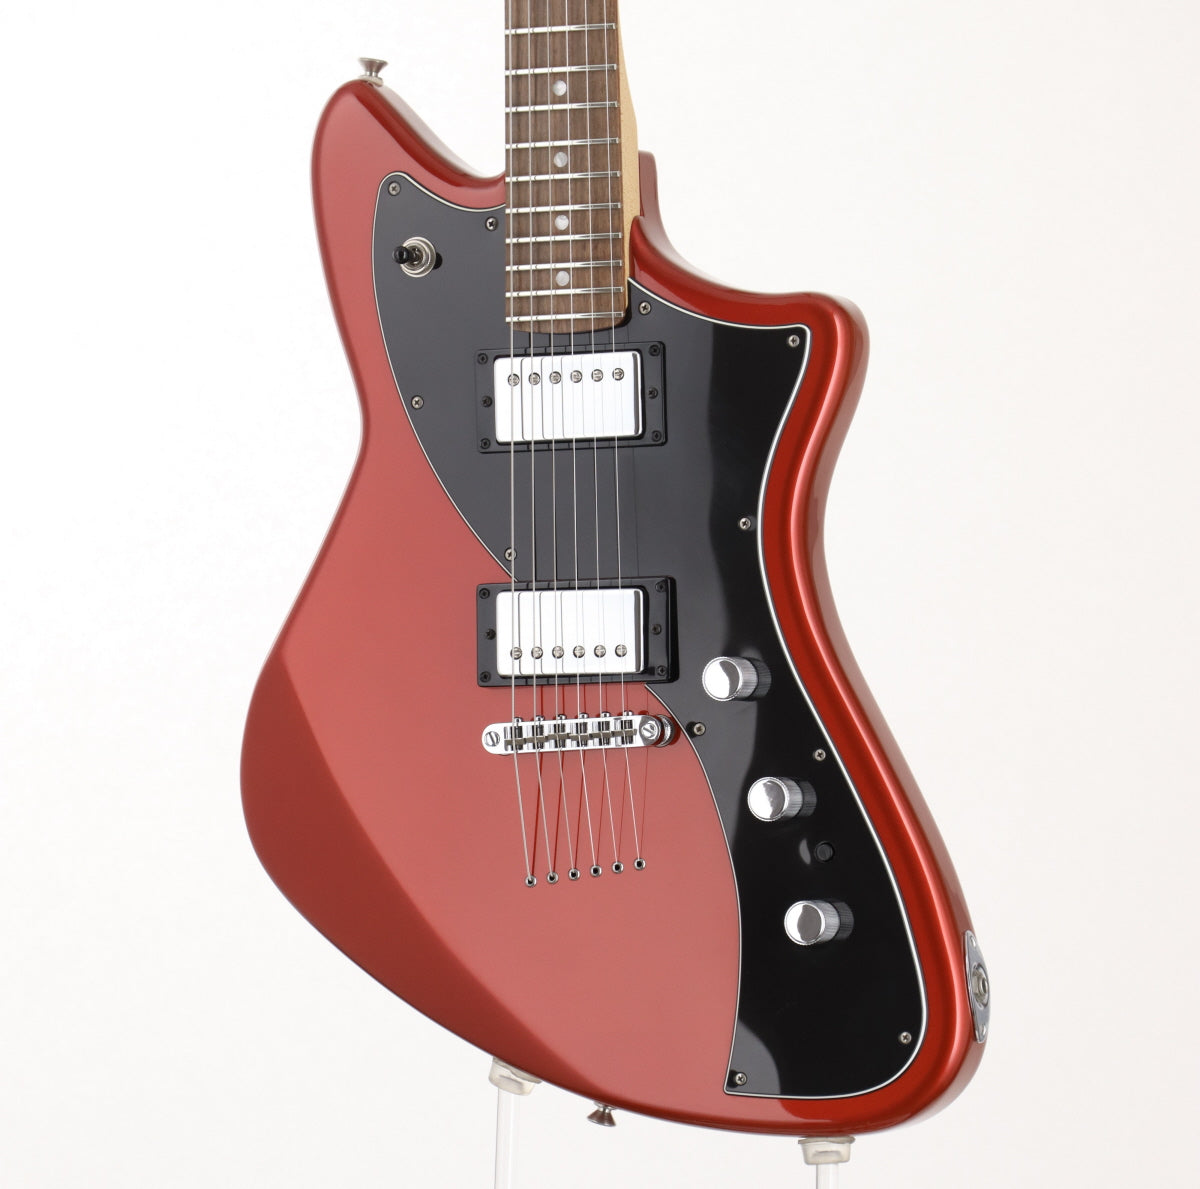 [SN MX19015591] USED Fender / Alternate Reality Series Meteora HH Candy Apple Red 2019 [09]